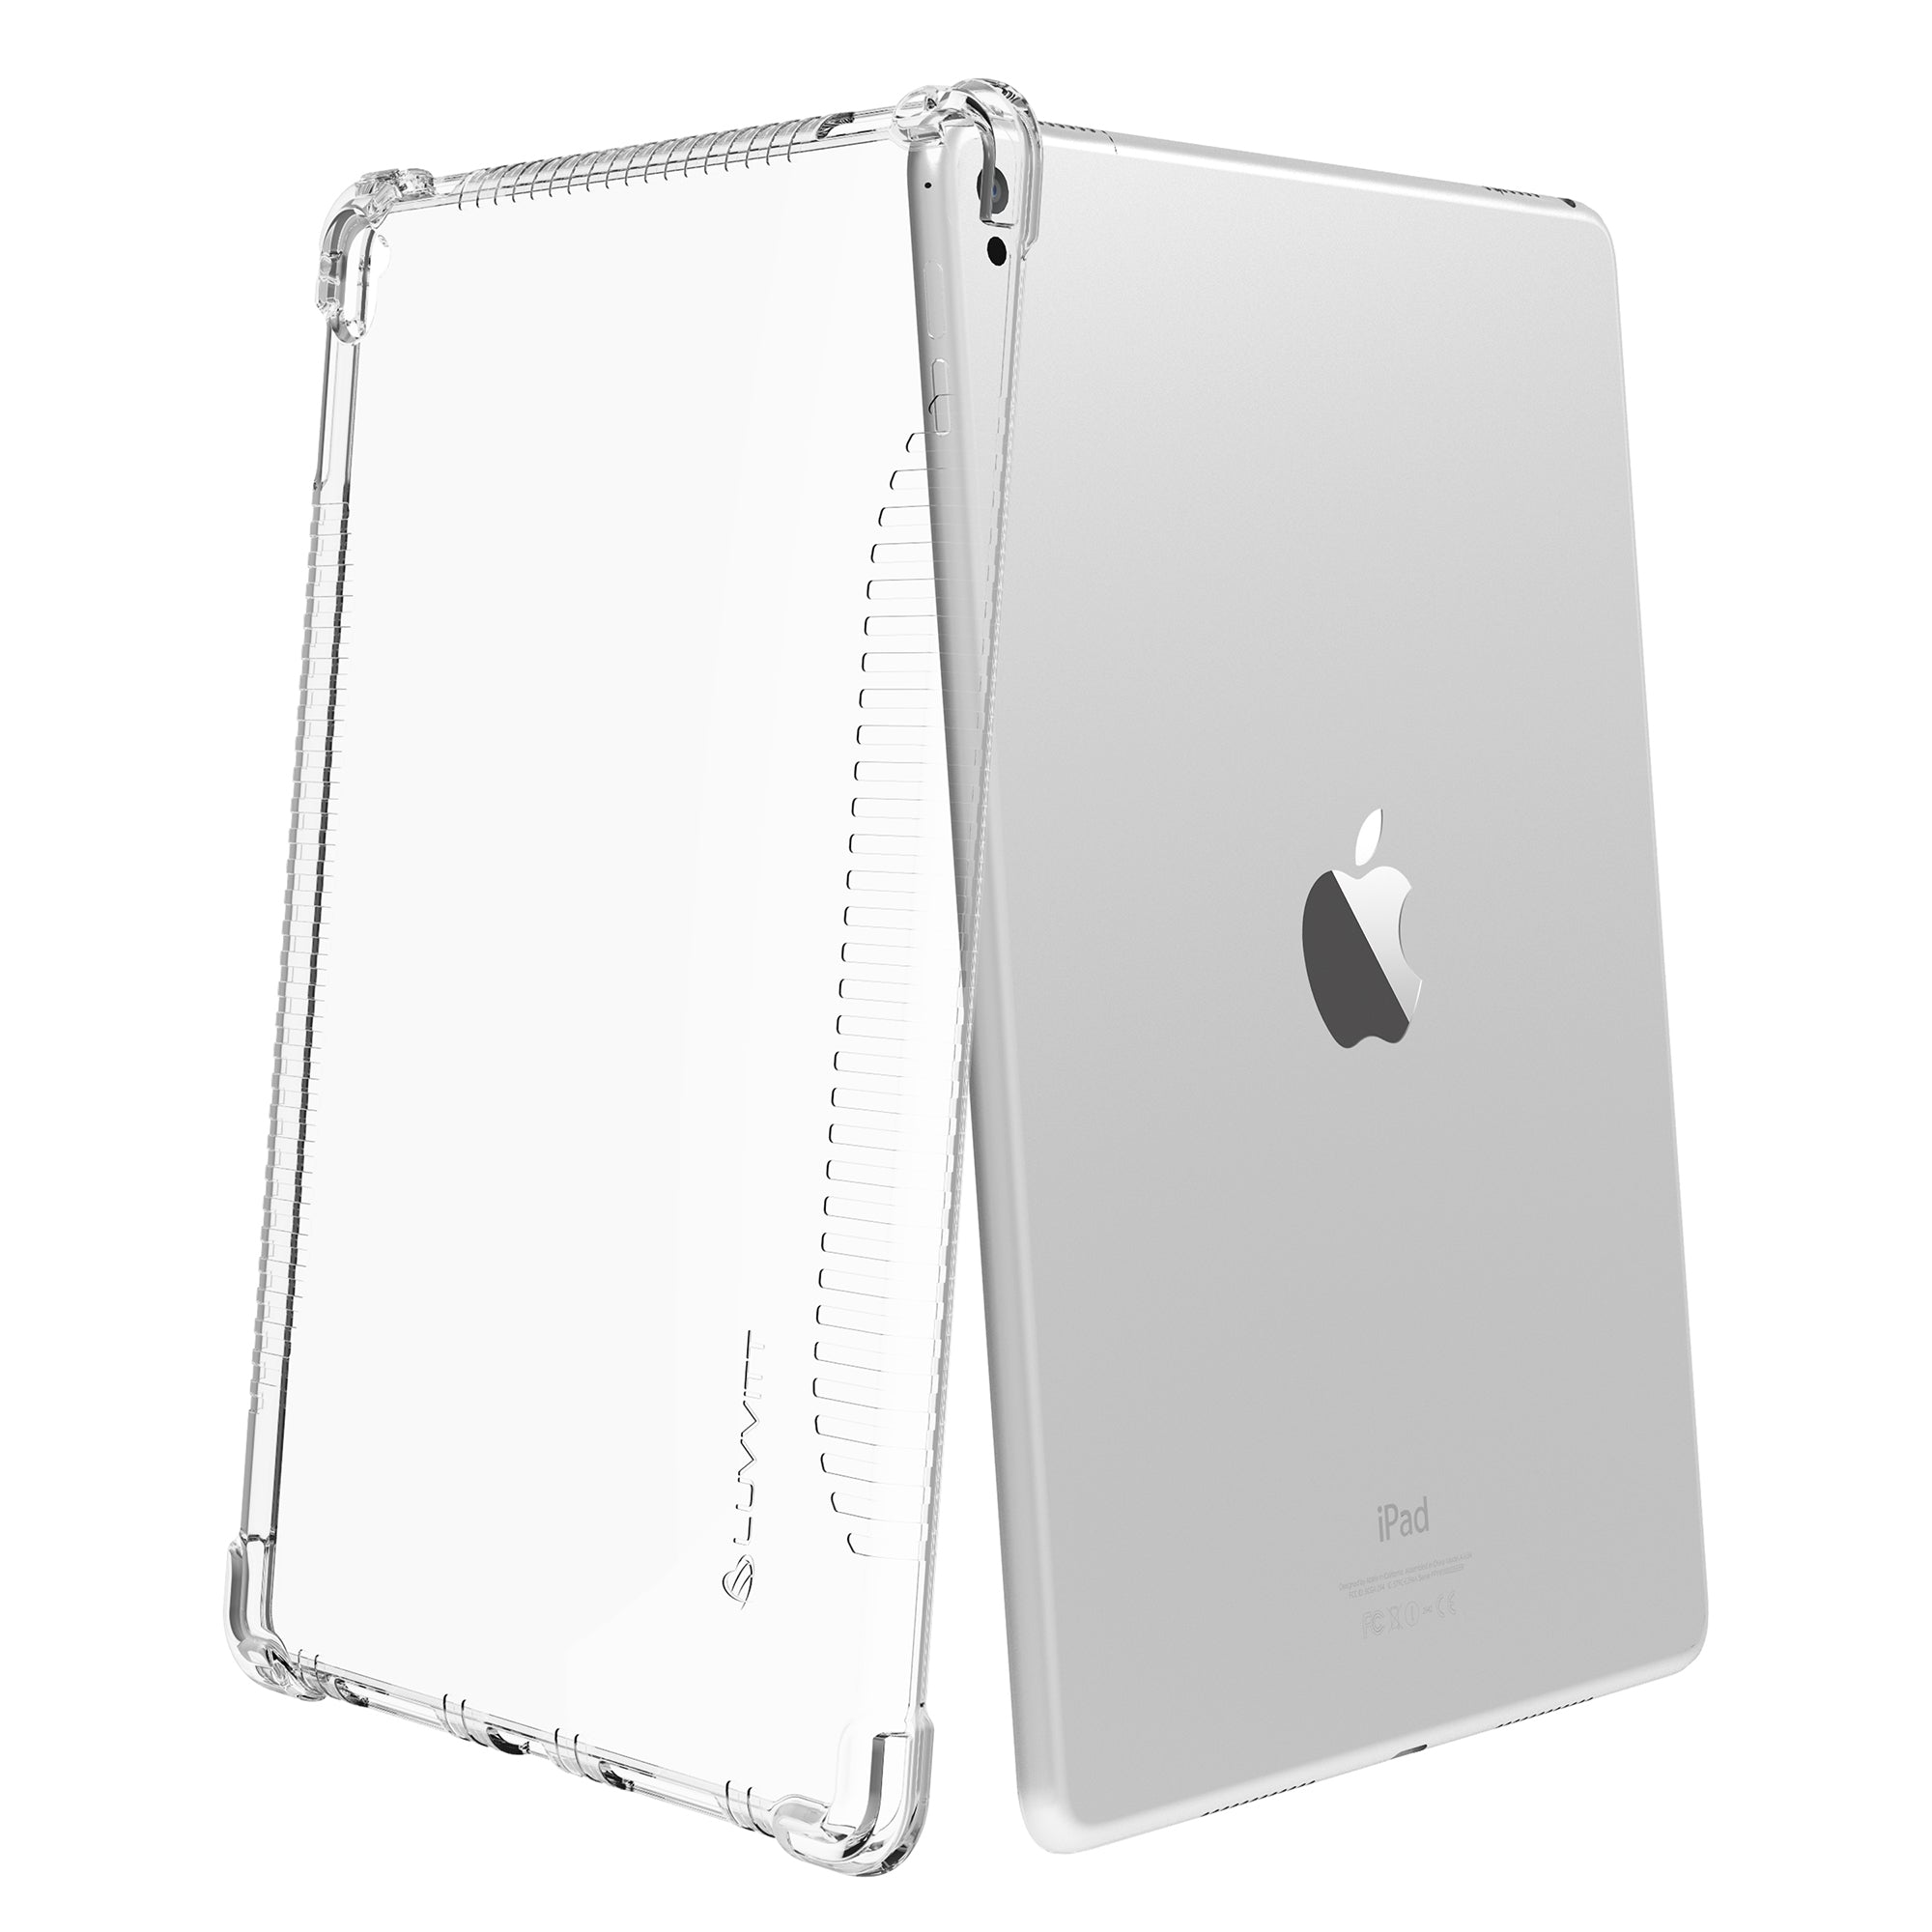 LUVVITT CLEAR GRIP Soft Skin TPU Rubber Back Cover for iPad Pro 9.7 inch - Clear